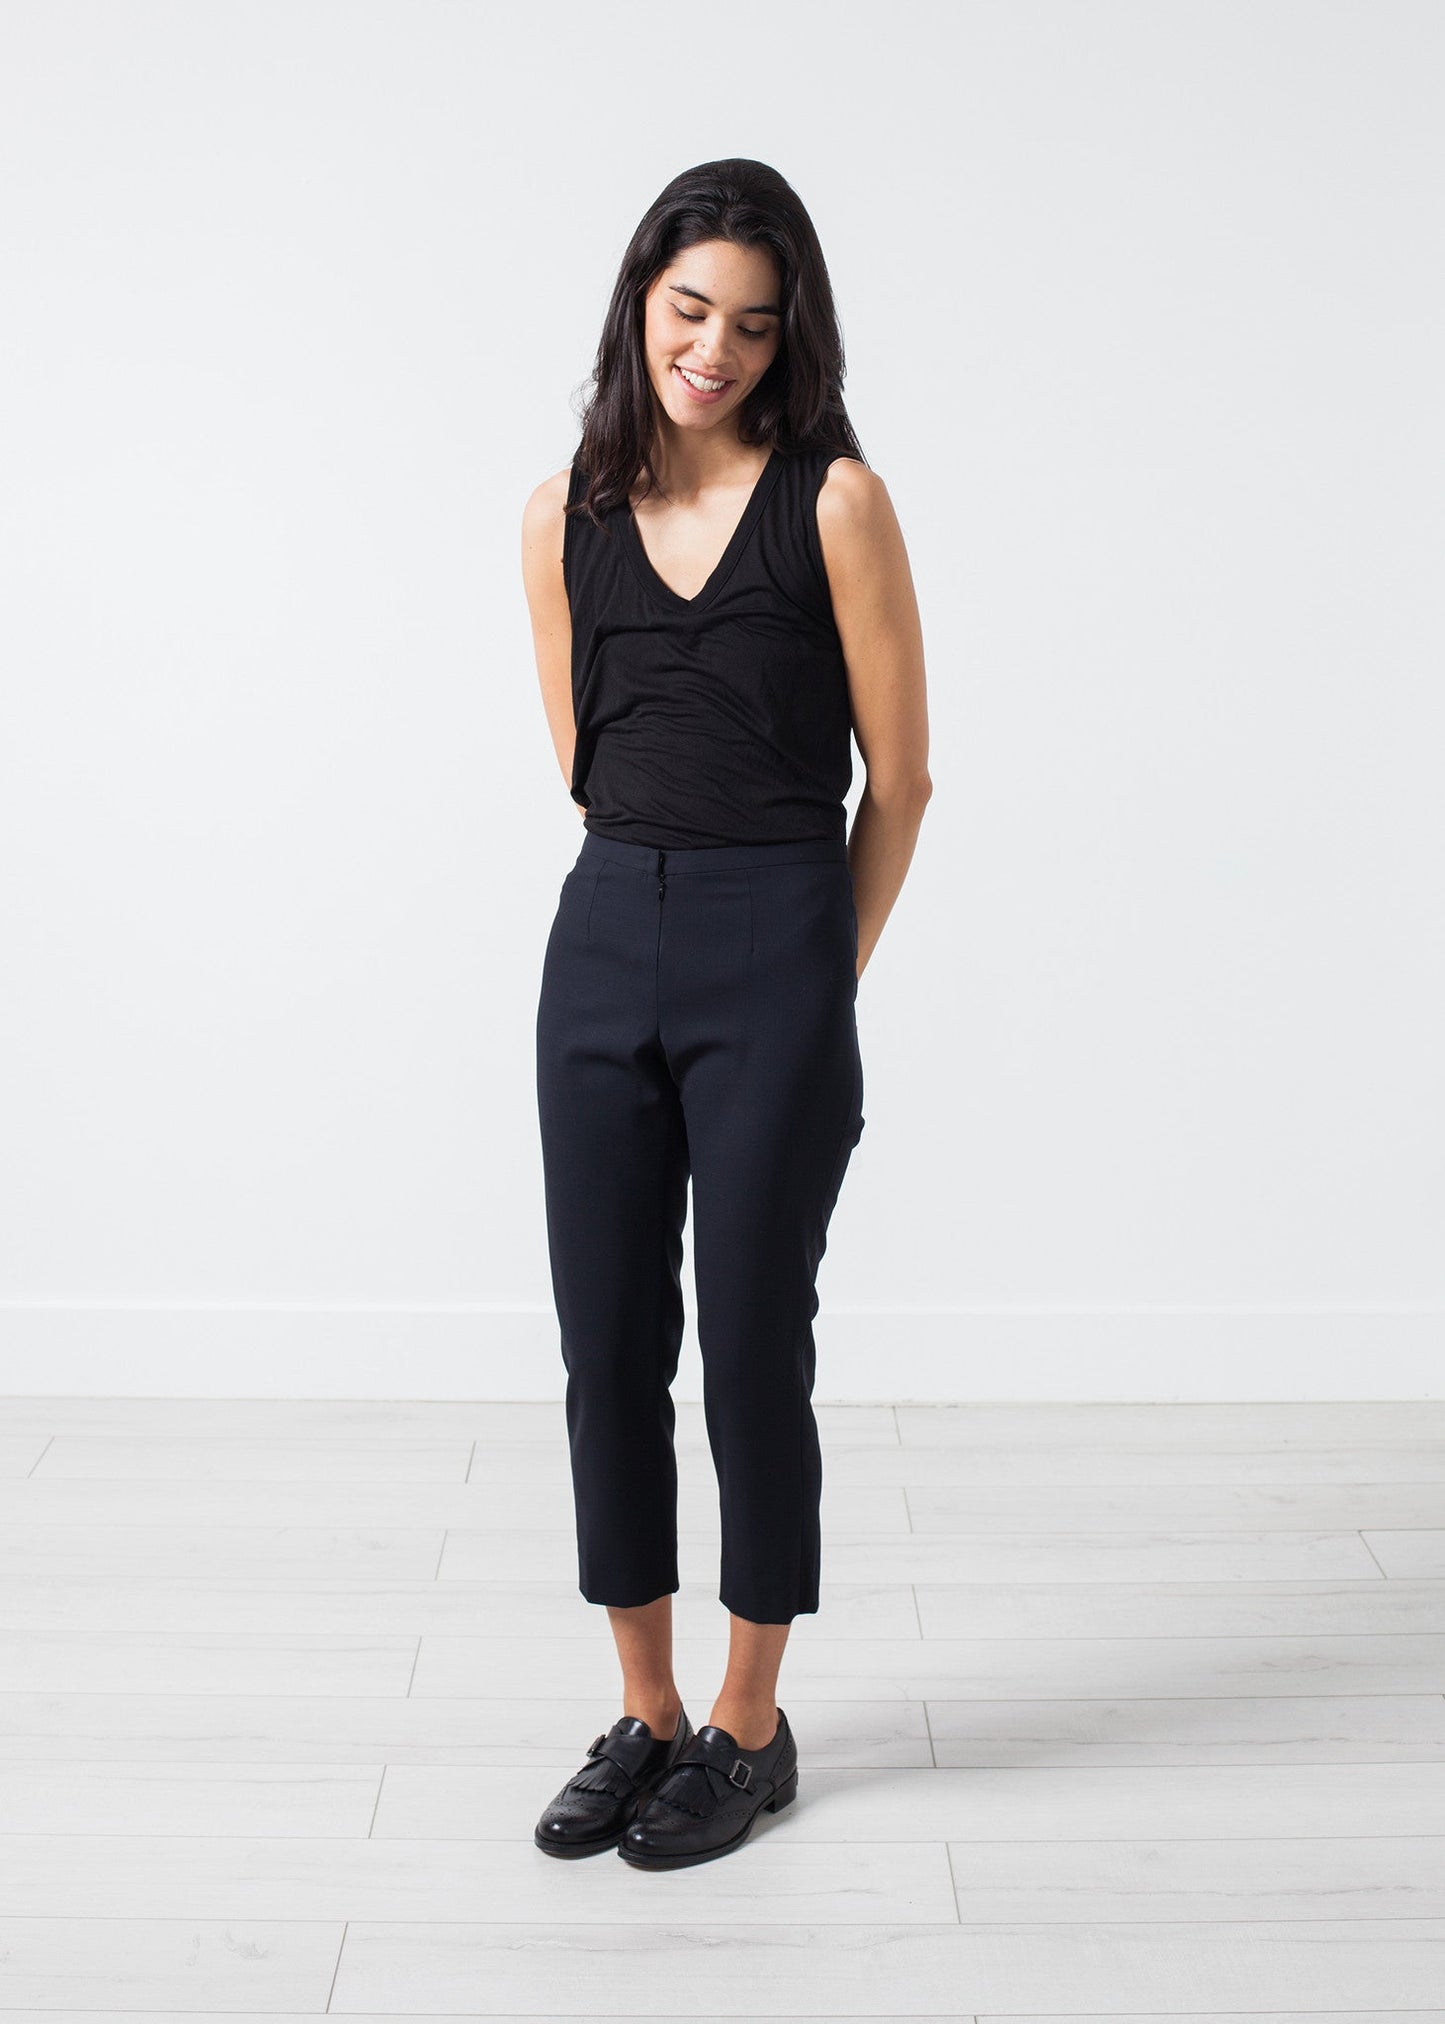 Wool Cropped Pant in Navy